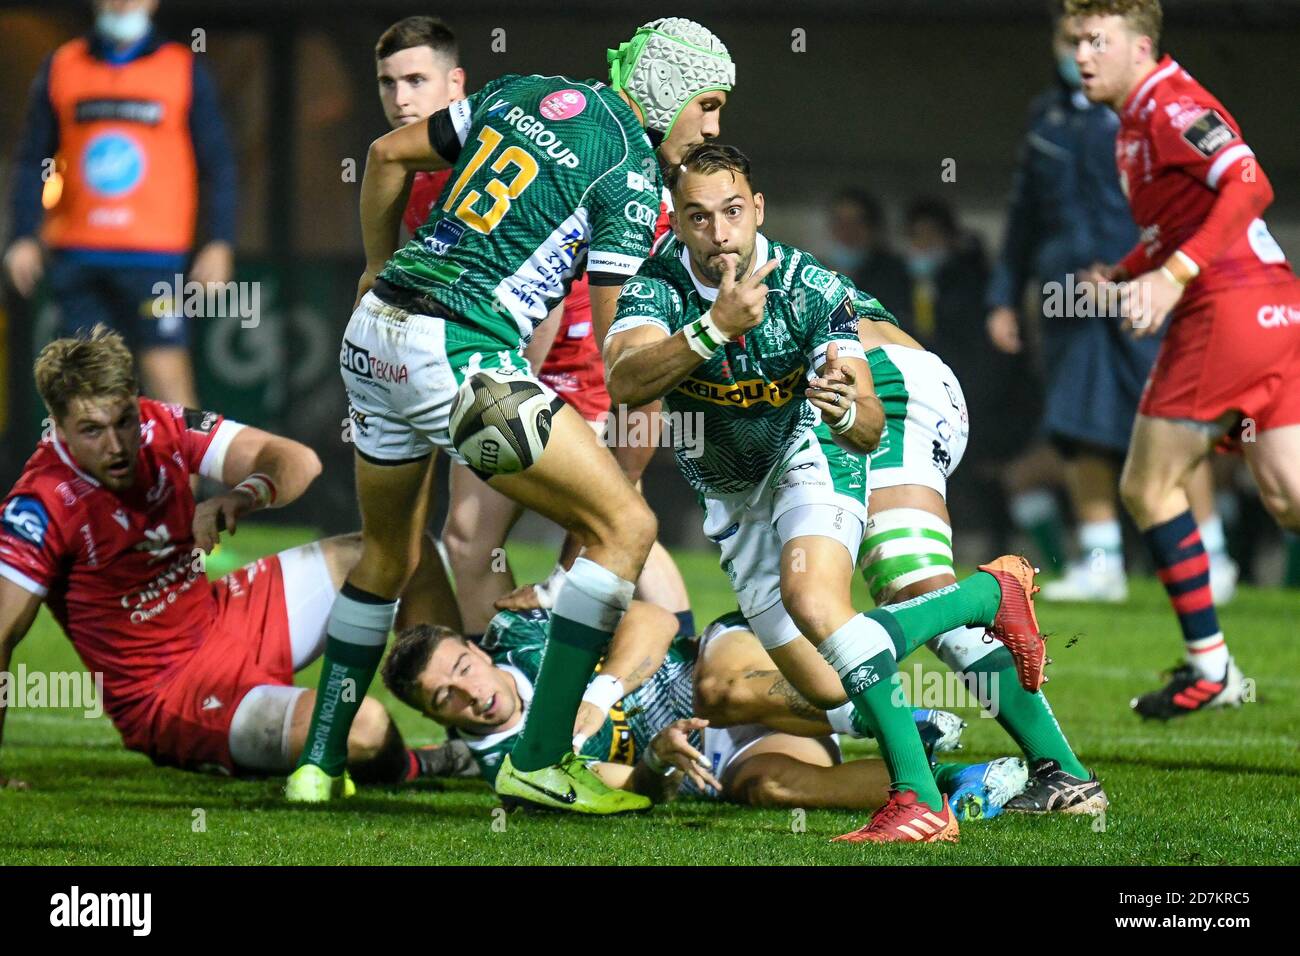 Stadio Comunale di Monigo, Treviso, Italy, 23 Oct 2020, Dewaldt Duvenage (Treviso) during Benetton Treviso vs Scarlets Rugby, Rugby Guinness Pro 14 match - Credit: LM/Ettore Griffoni/Alamy Live News Stock Photo